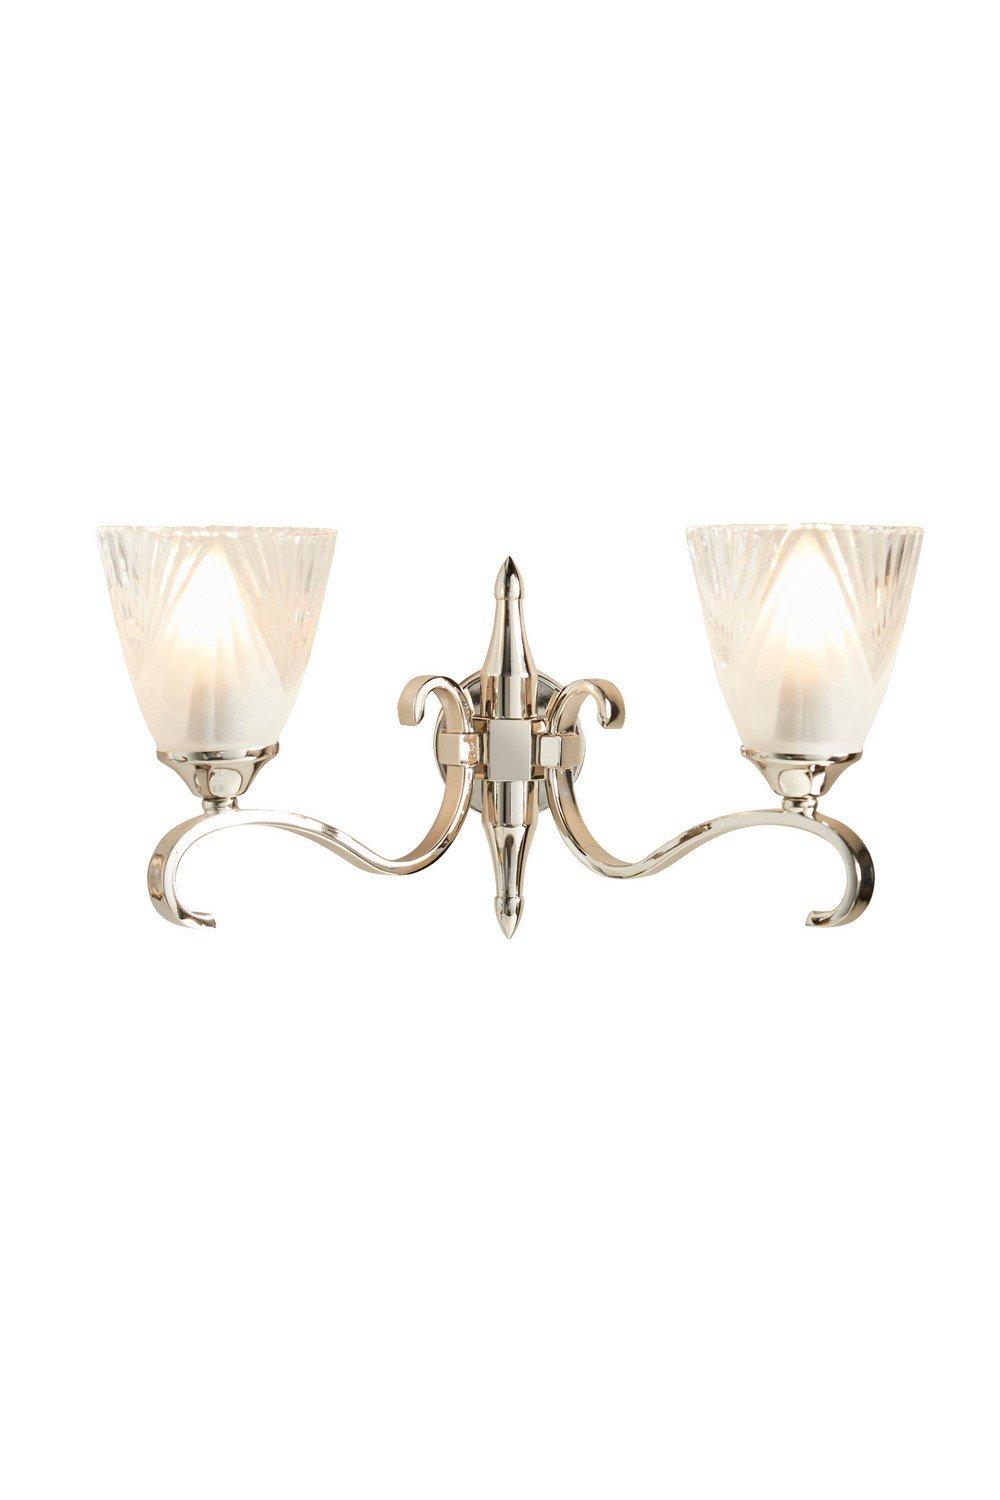 Columbia 2 Light Indoor Twin Wall Light Clear Glass Polished Nickel Plate with Deco Shades E14